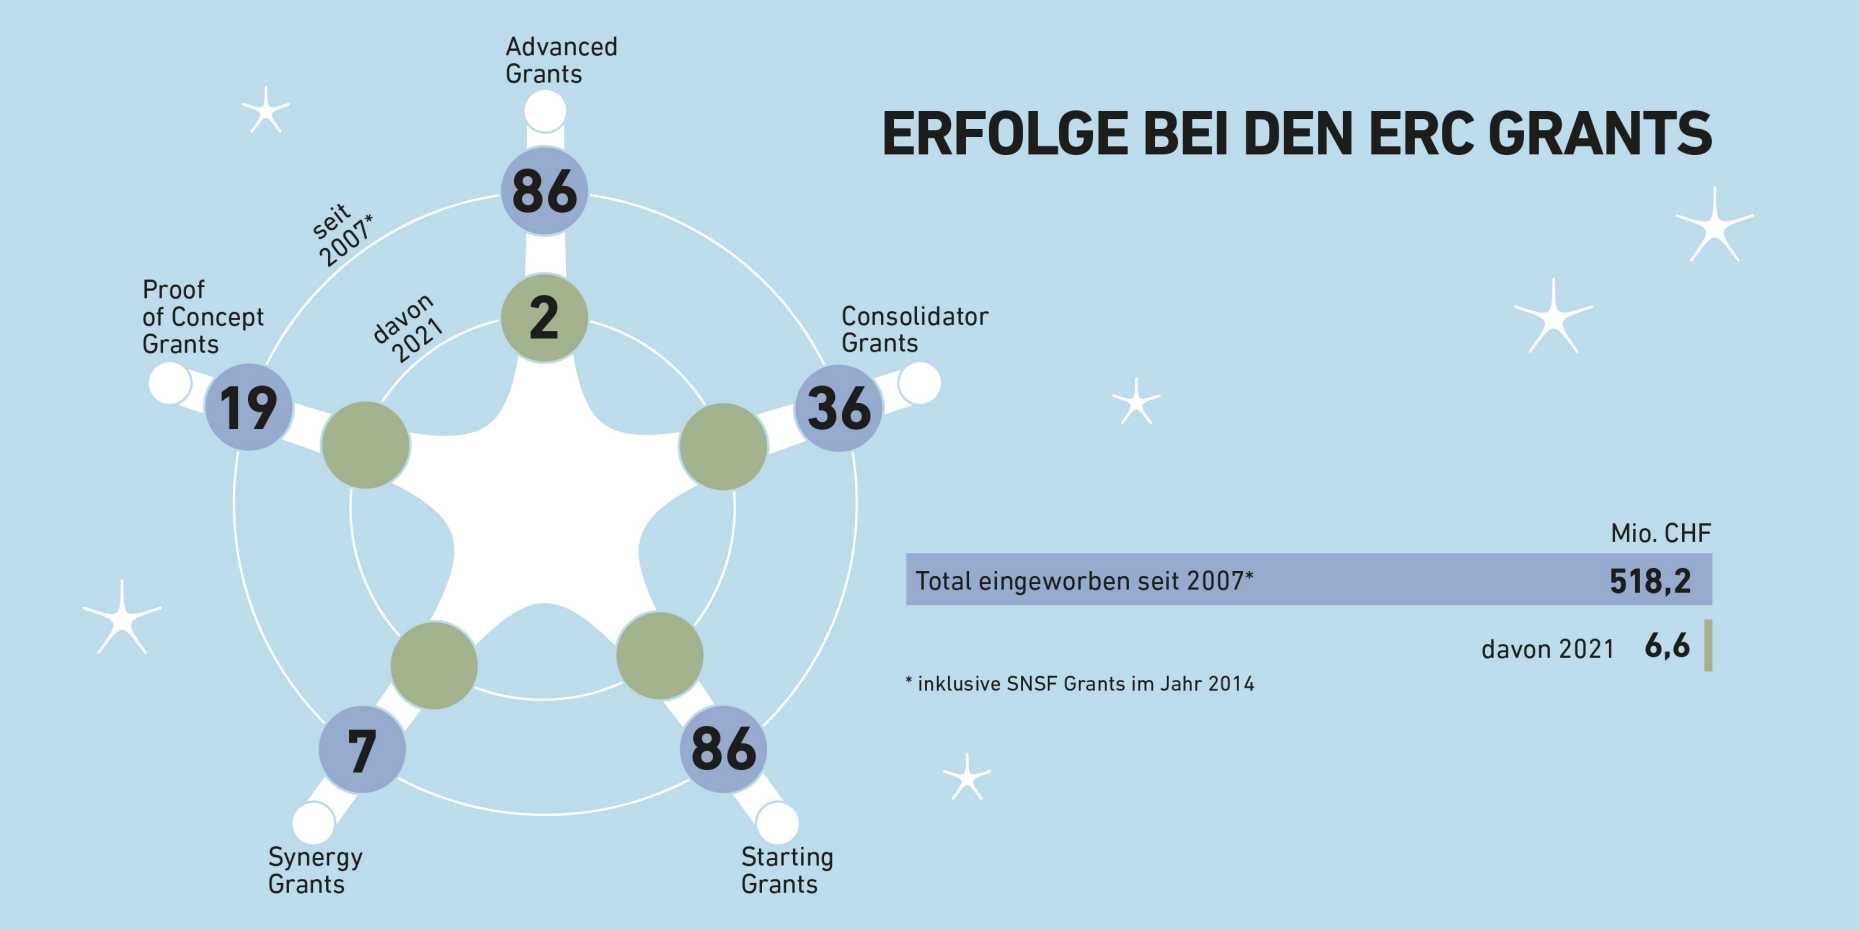 Enlarged view: ETH's successes with ERC grants at a glance: Since 2007, 86 ETH projects have been supported with an Advanced Grant (Graphic: ETH Zurich)